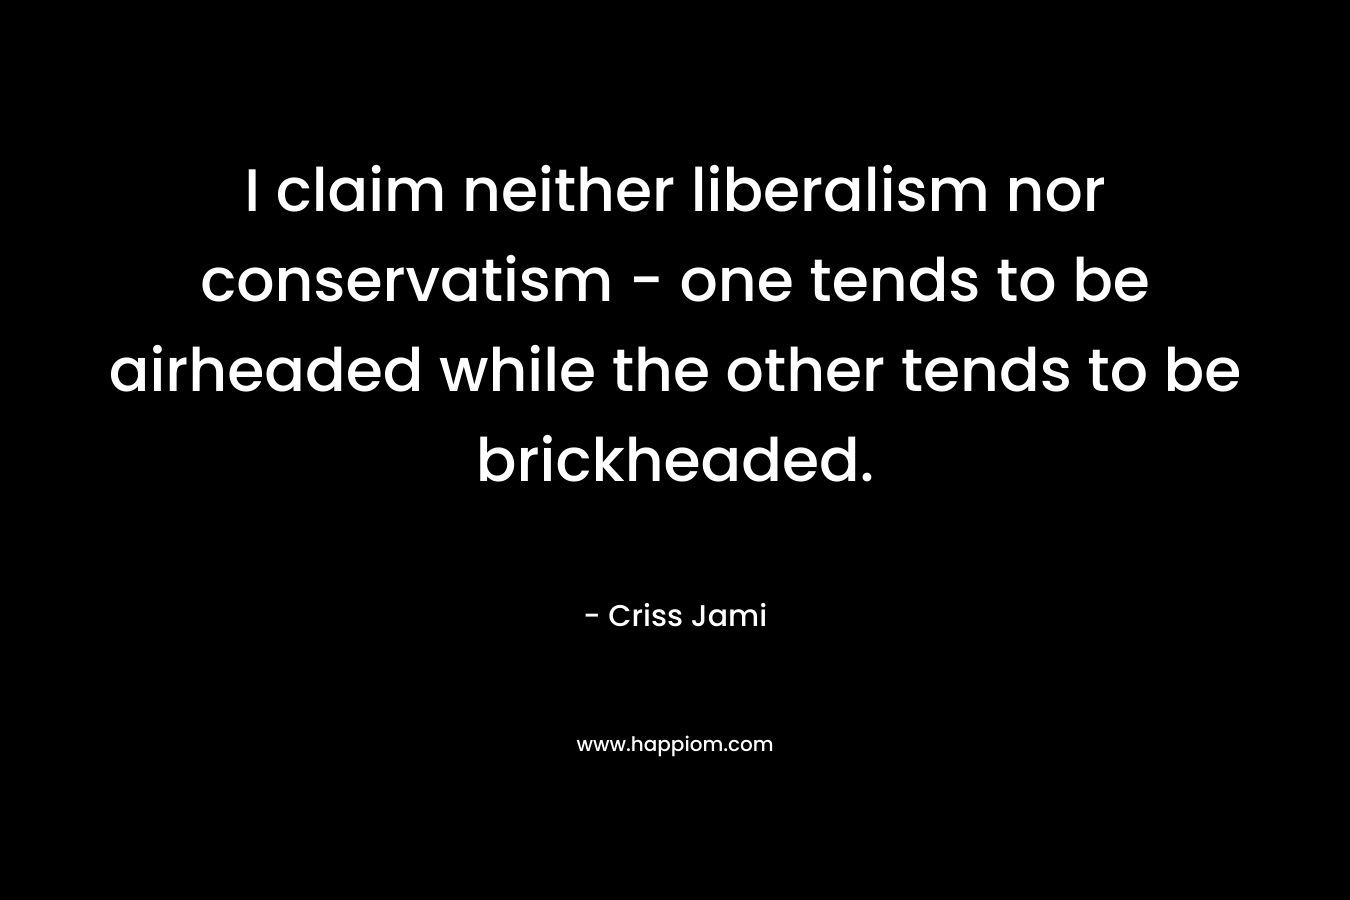 I claim neither liberalism nor conservatism - one tends to be airheaded while the other tends to be brickheaded.